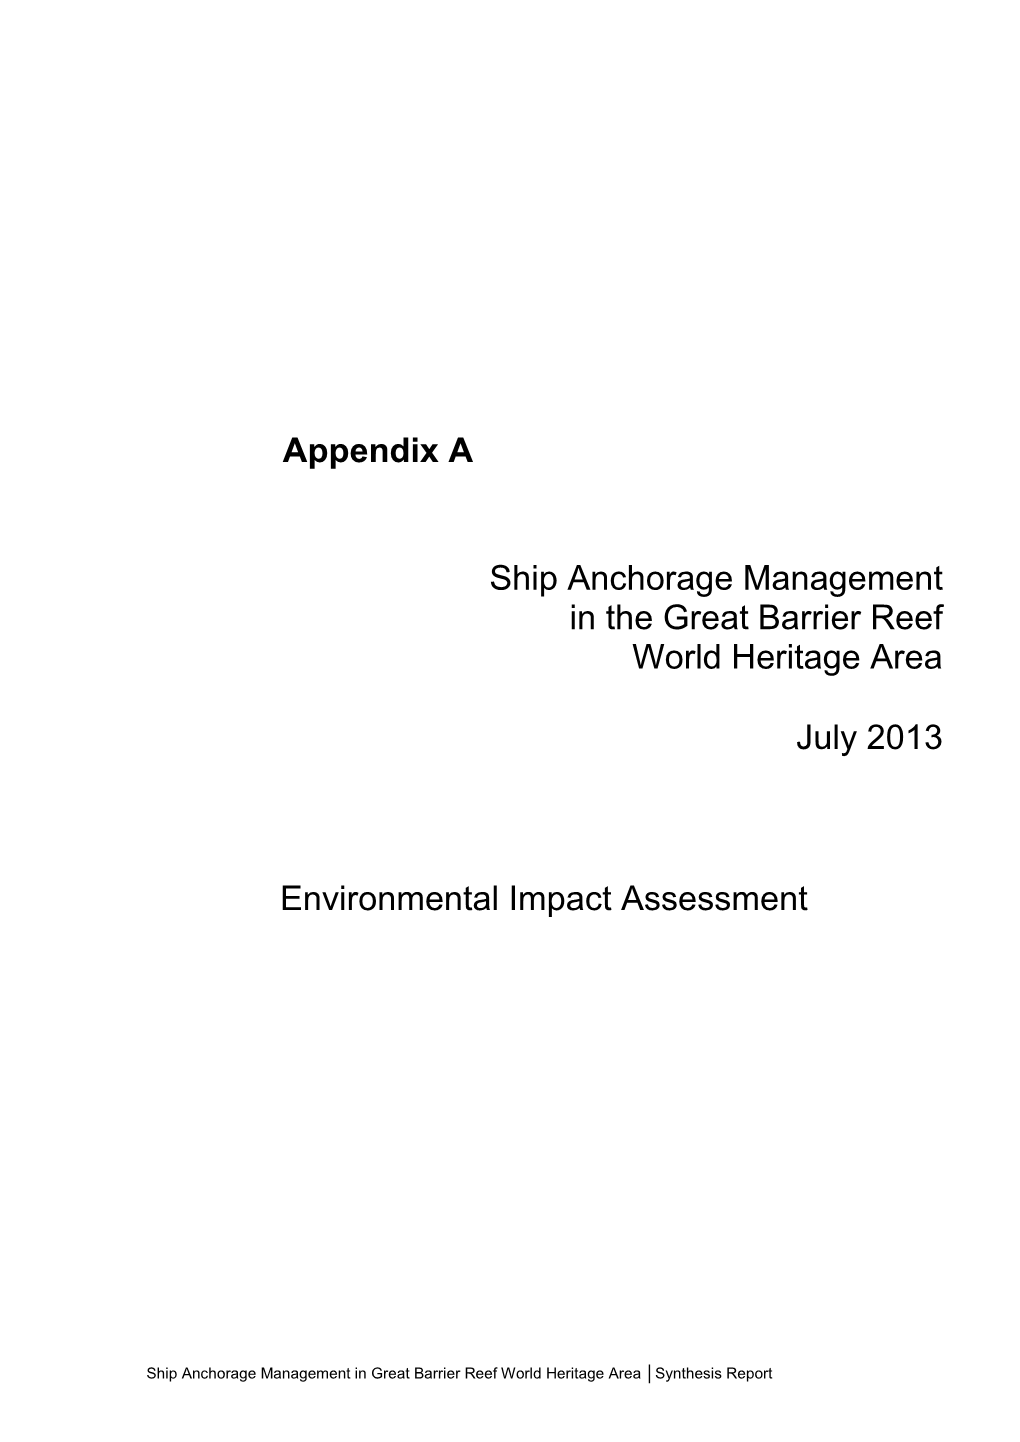 Ship Anchorage Management in the Great Barrier Reef World Heritage Area